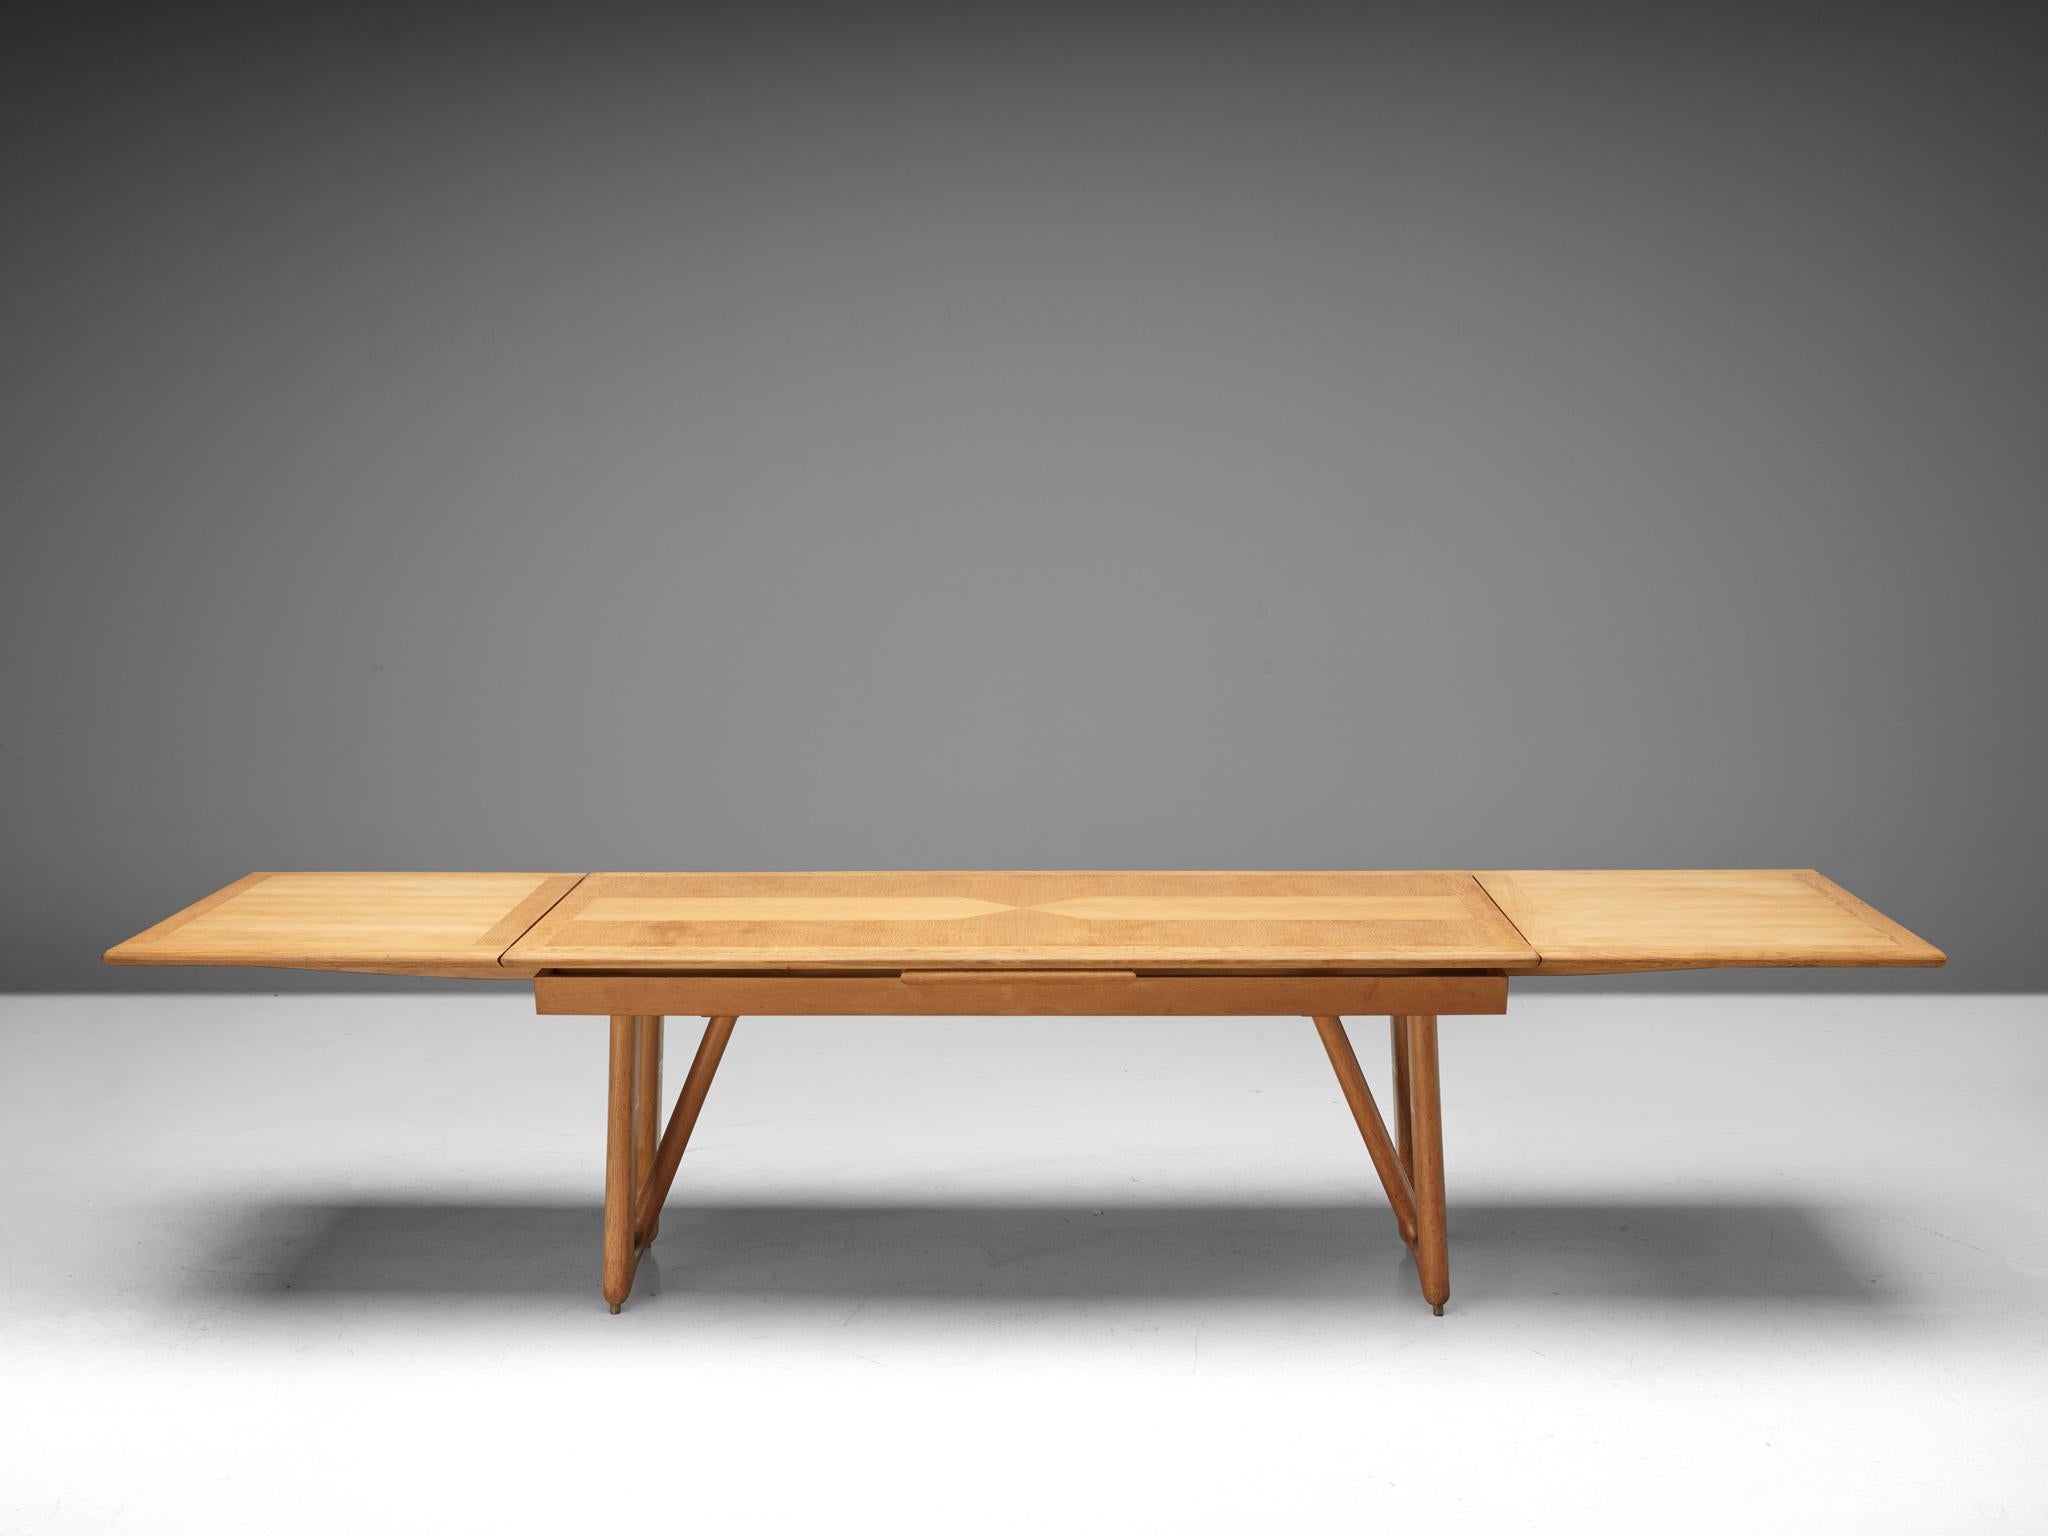 Guillerme et Chambron for Votre Maison, extendable dining table model 'Petronille', oak, France, 1966. 

This oak extendable dining table by French designer duo Jacques Chambron is part of the midcentury design collection. The legs of this table are